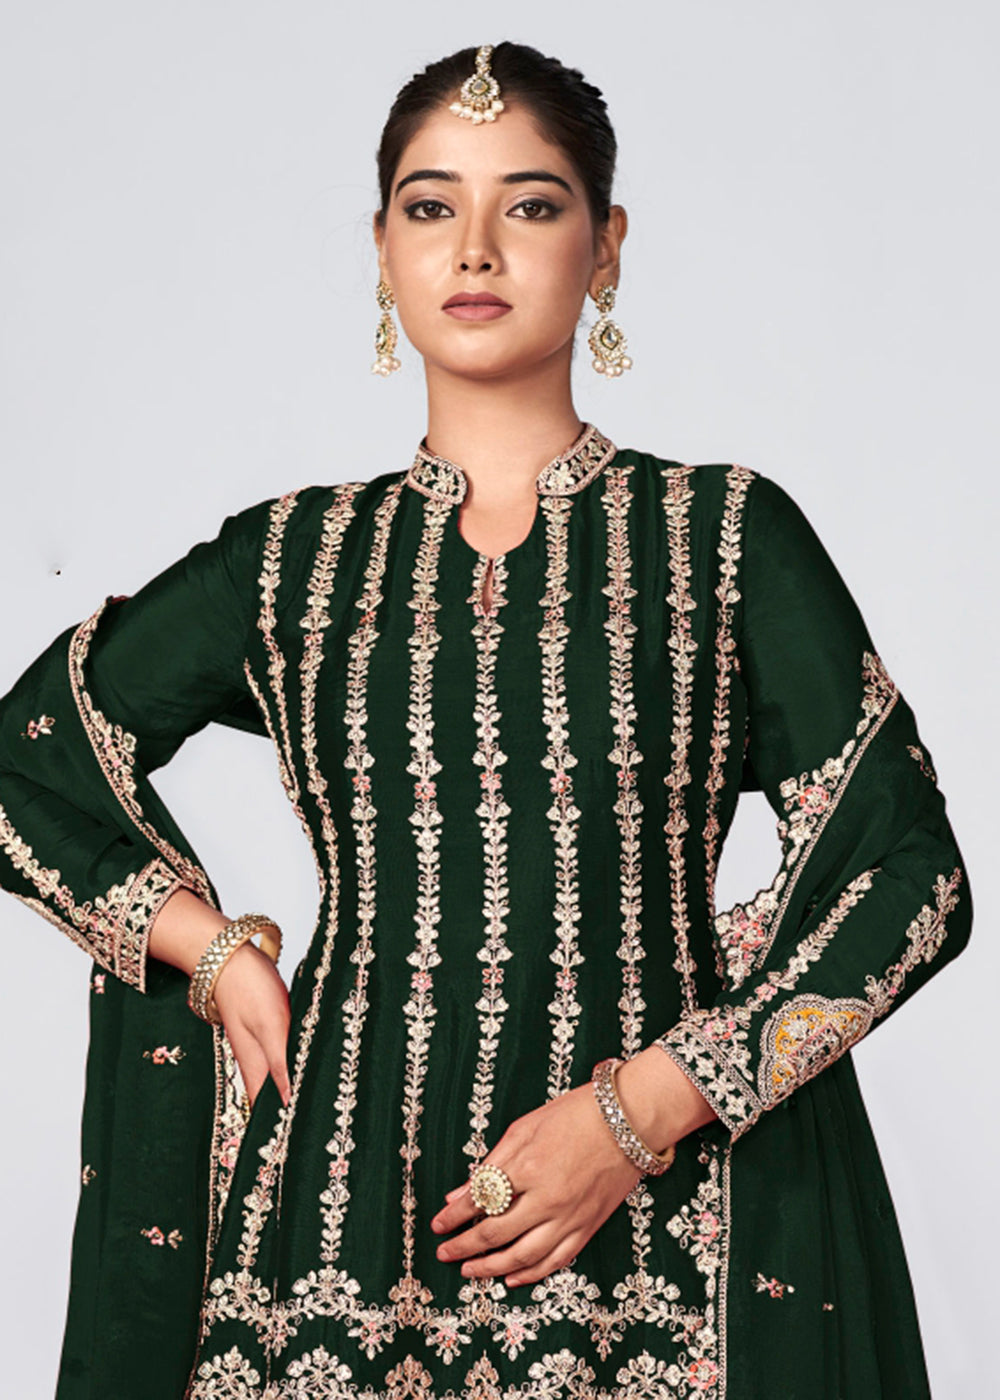 Buy Now Green Heavy Chinnon Embroidered Festive Palazzo Suit Online in USA, UK, Canada, Germany, Australia & Worldwide at Empress Clothing.